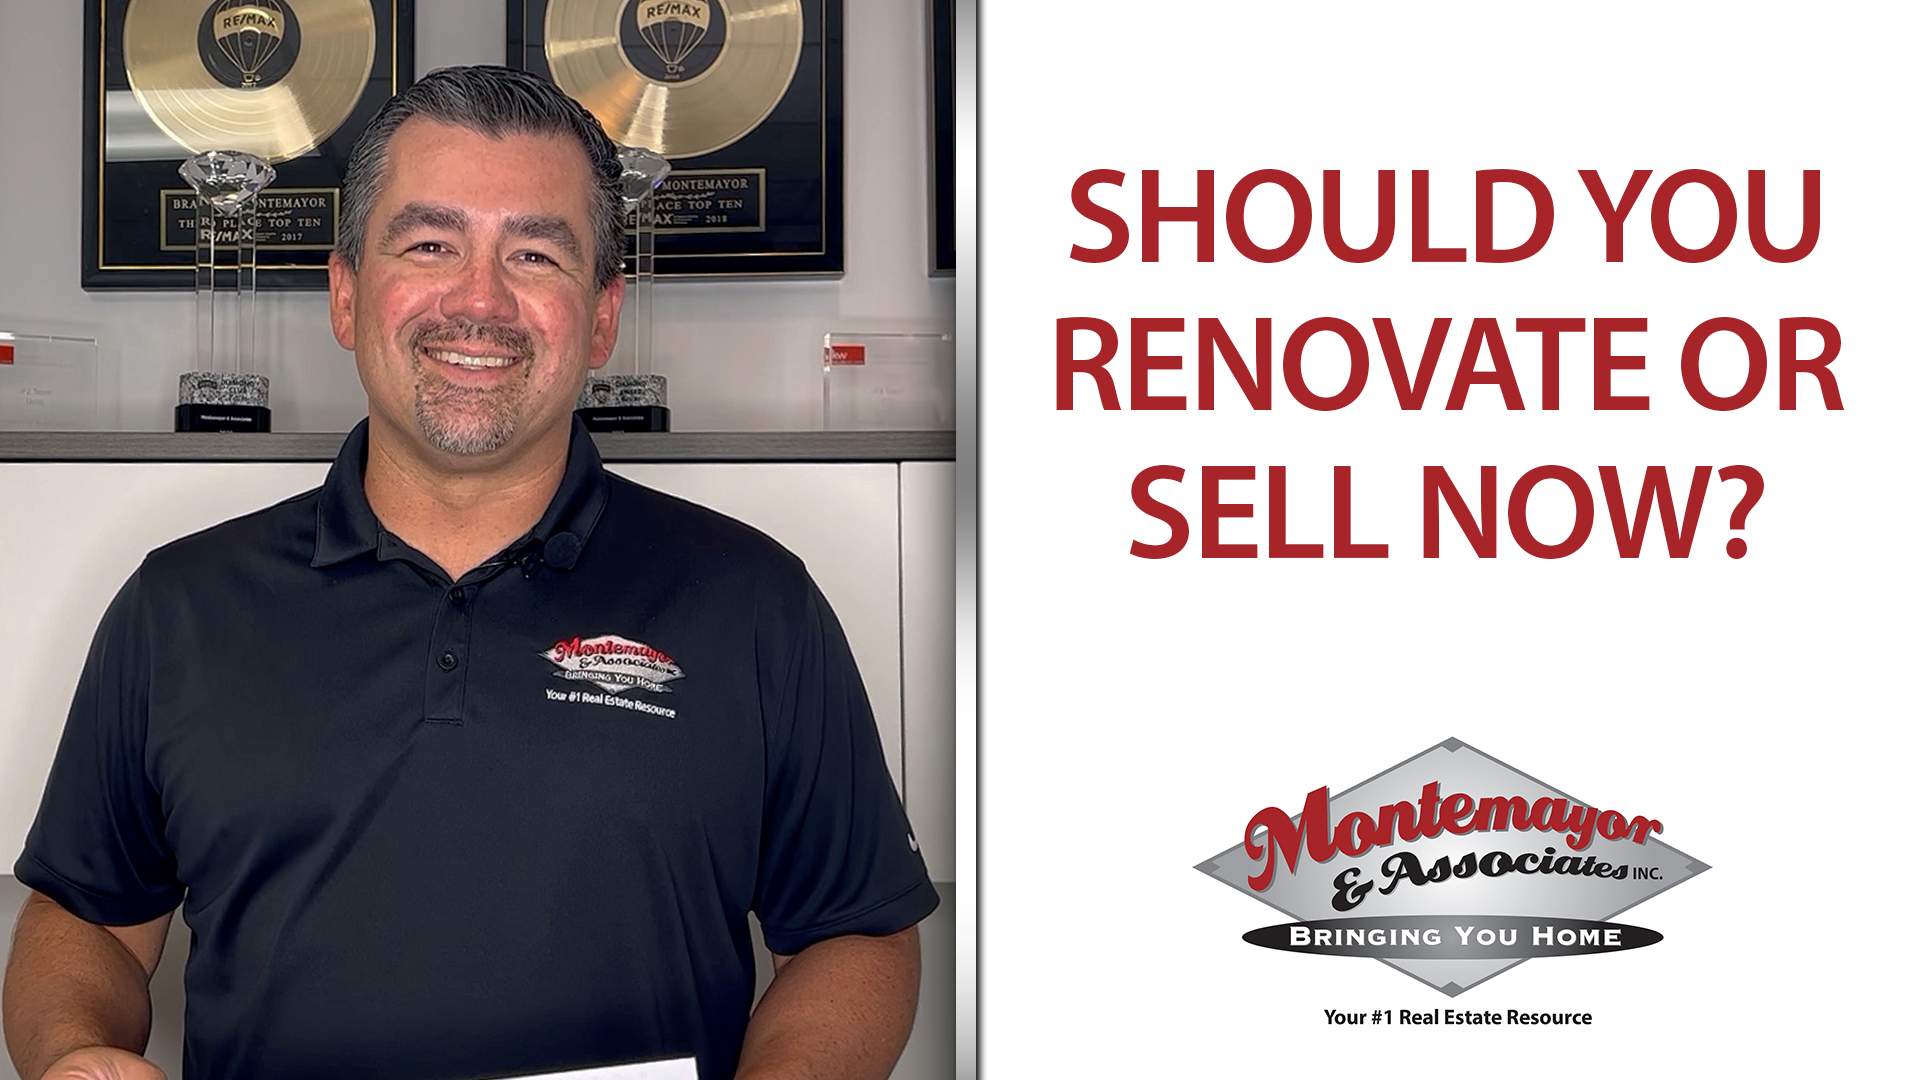 The Truth About Renovations in Our Market